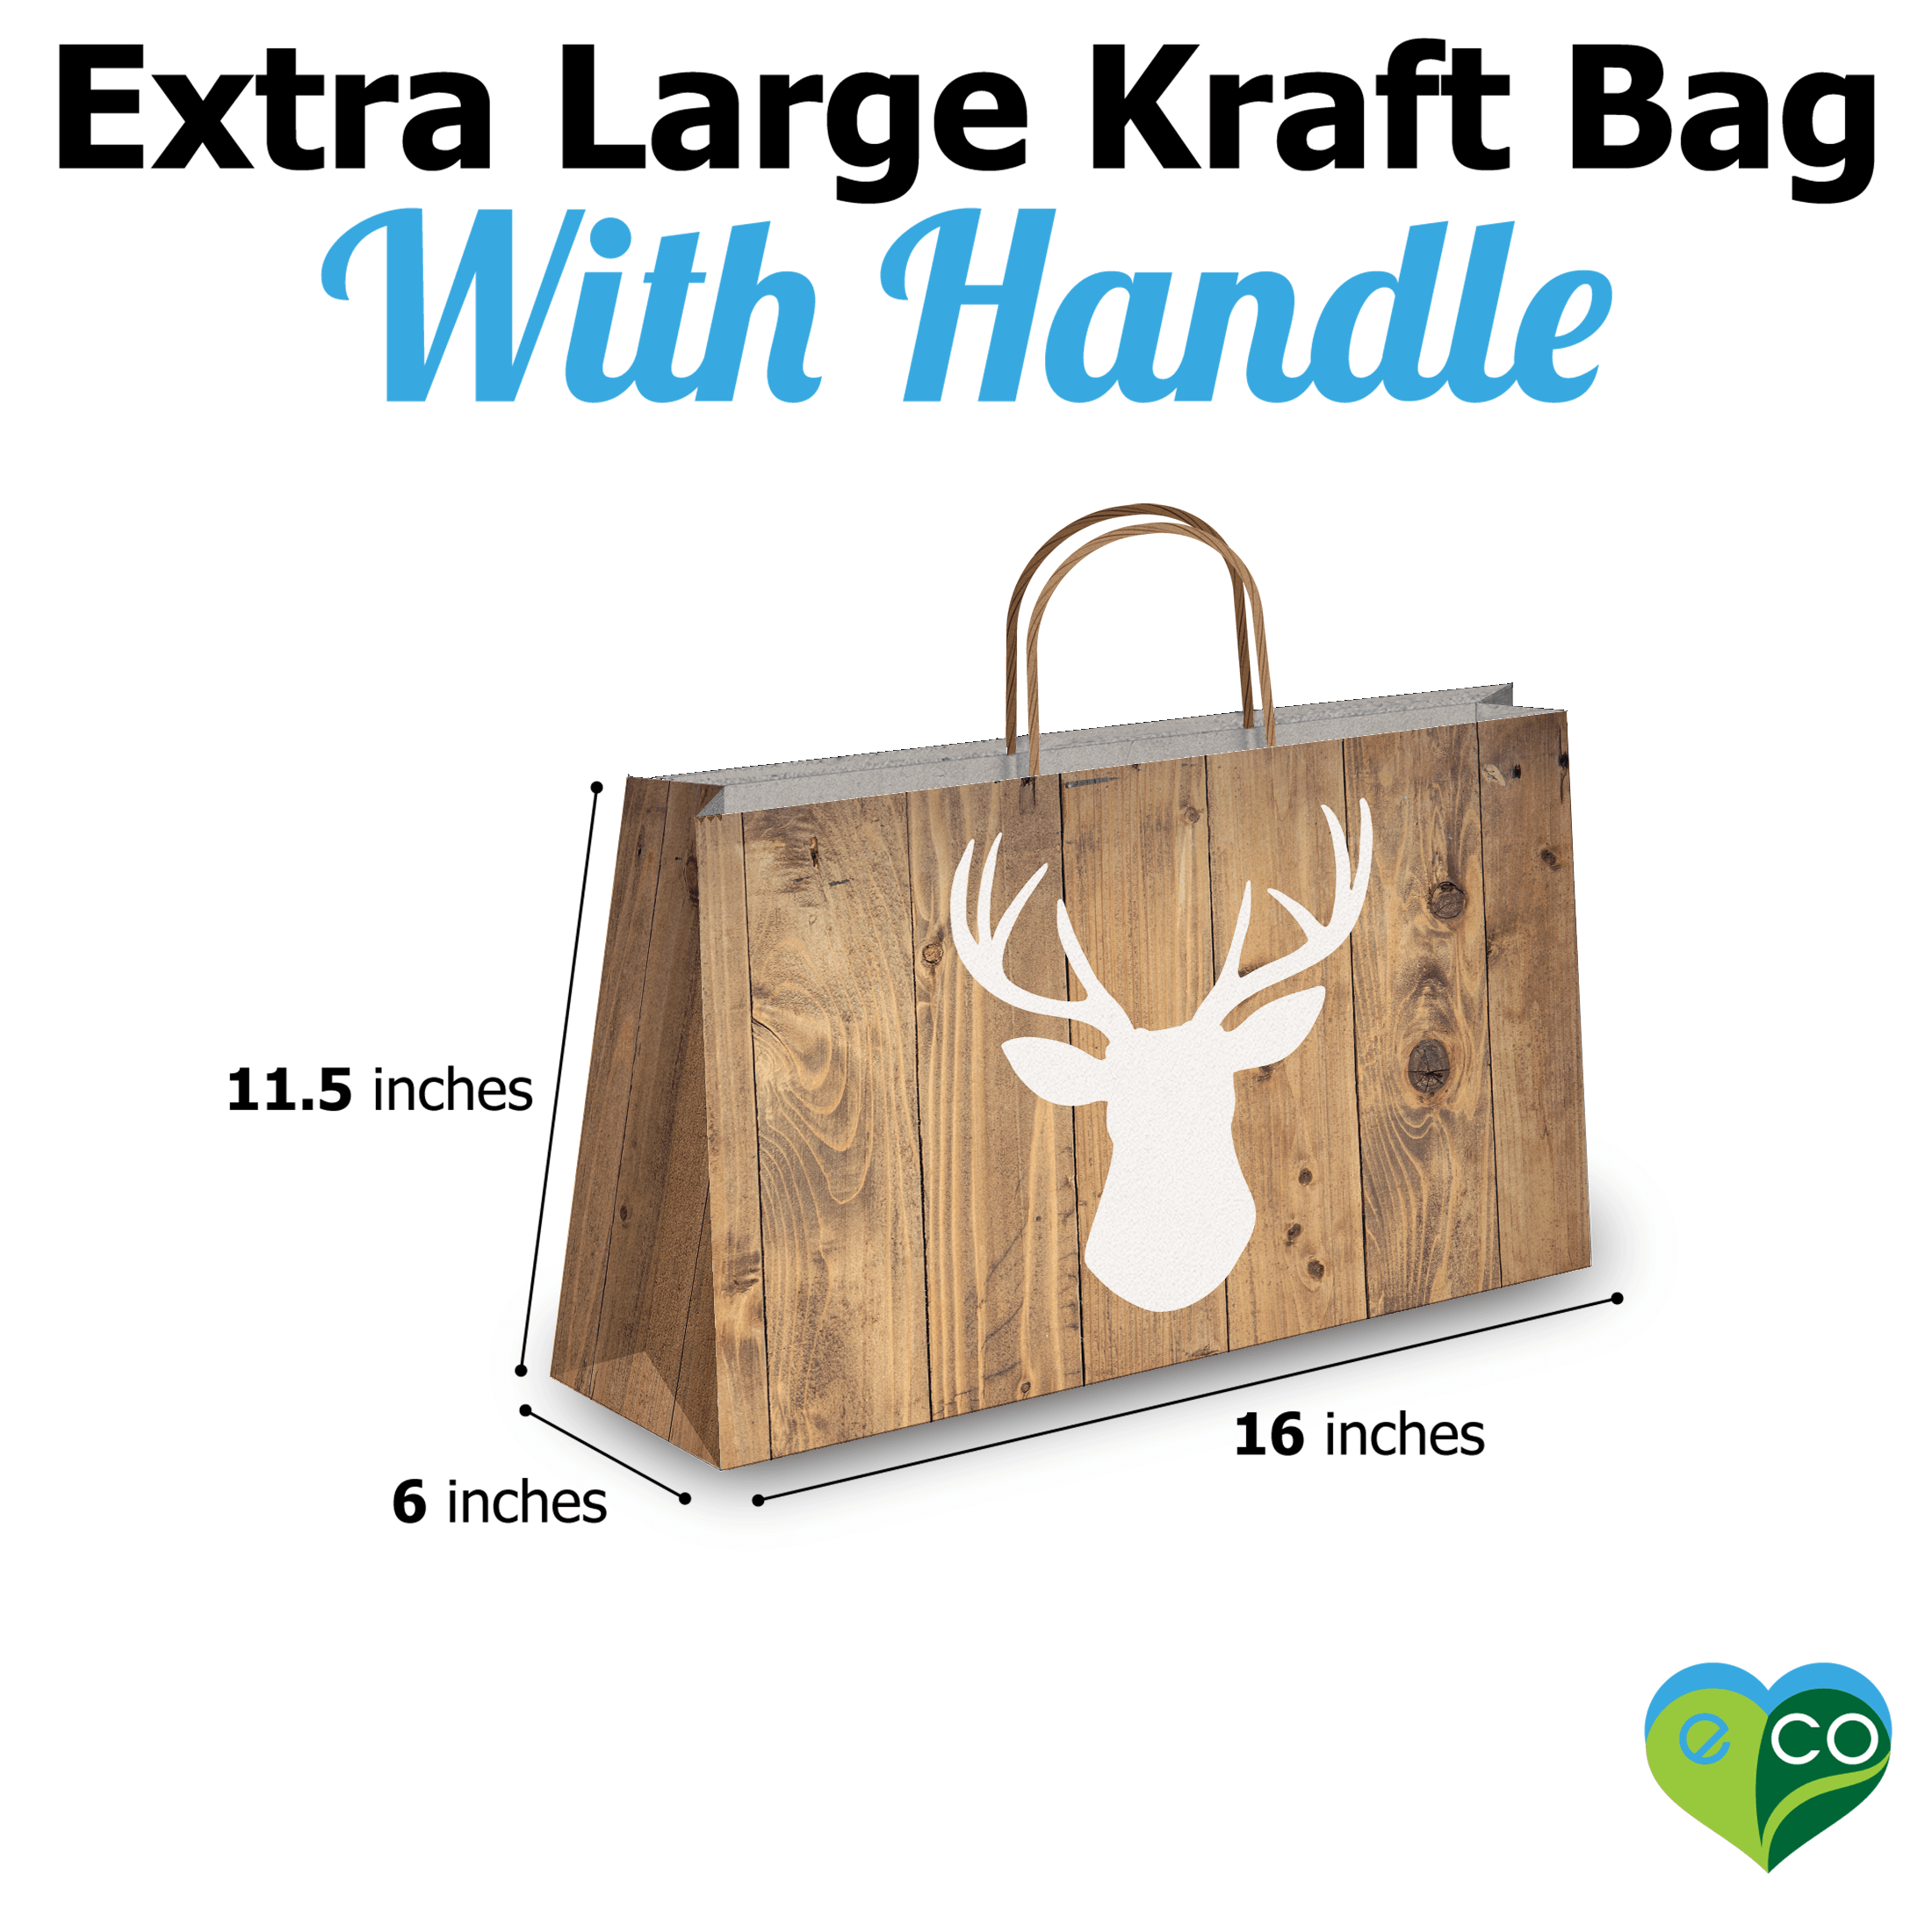 Deer Head Large Birthday Gift Bags Vogue Kraft Shopping Bags with Handles (11.5x16x6 inches) - Pro Supply Global